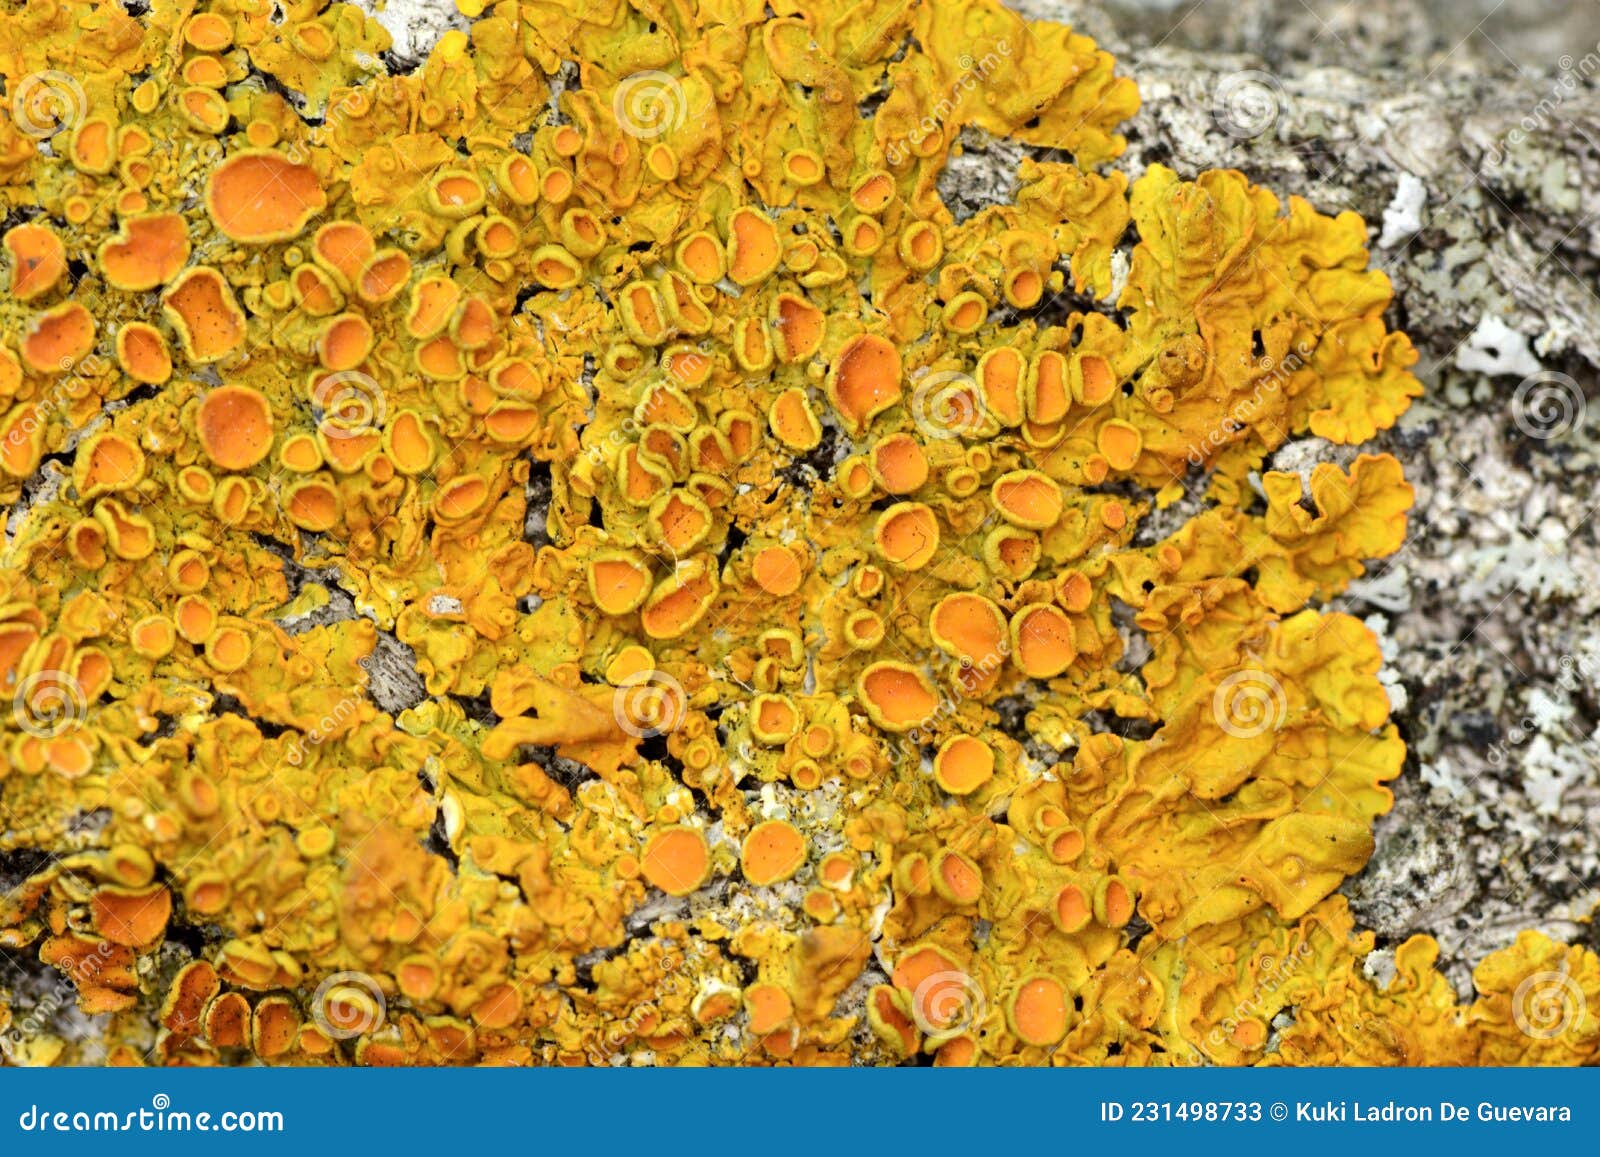 detail of yellow lichen on tree trunk